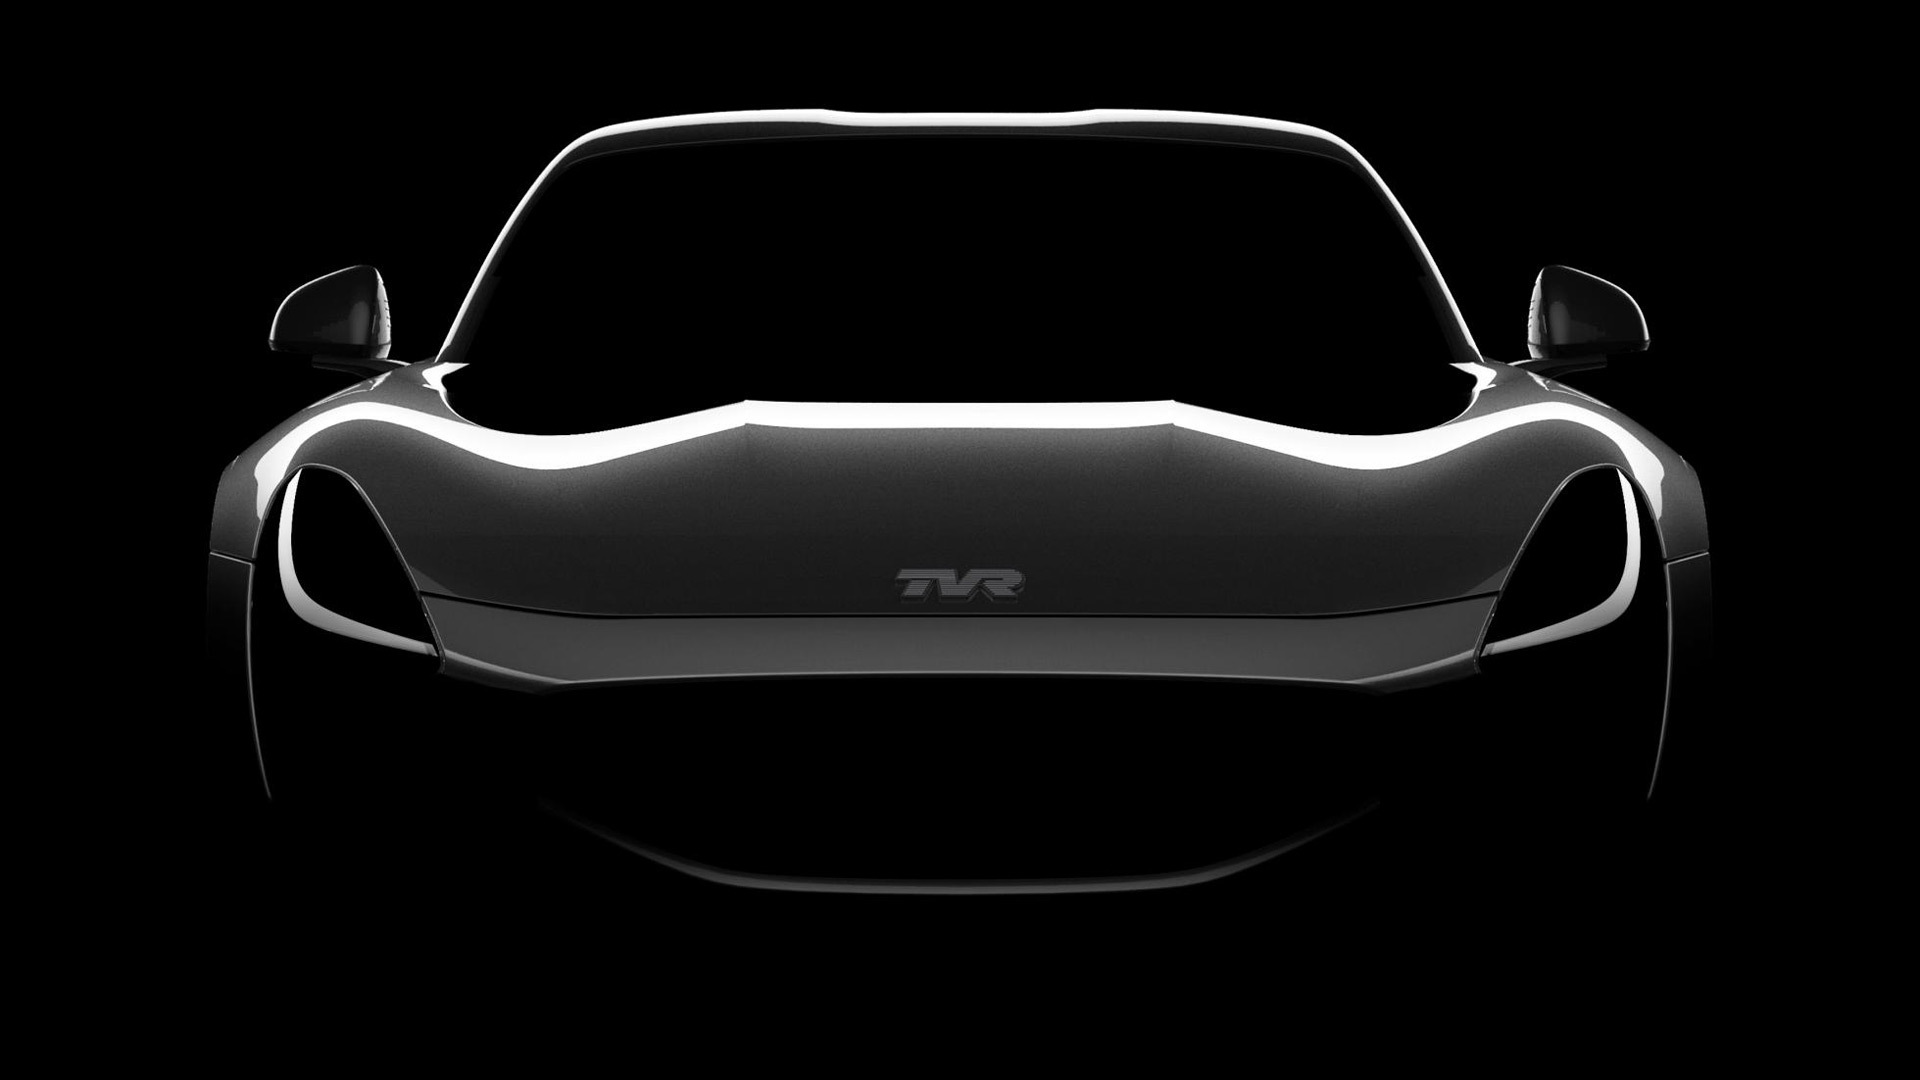 TVR sports car teased ahead of 2017 Goodwood Revival reveal